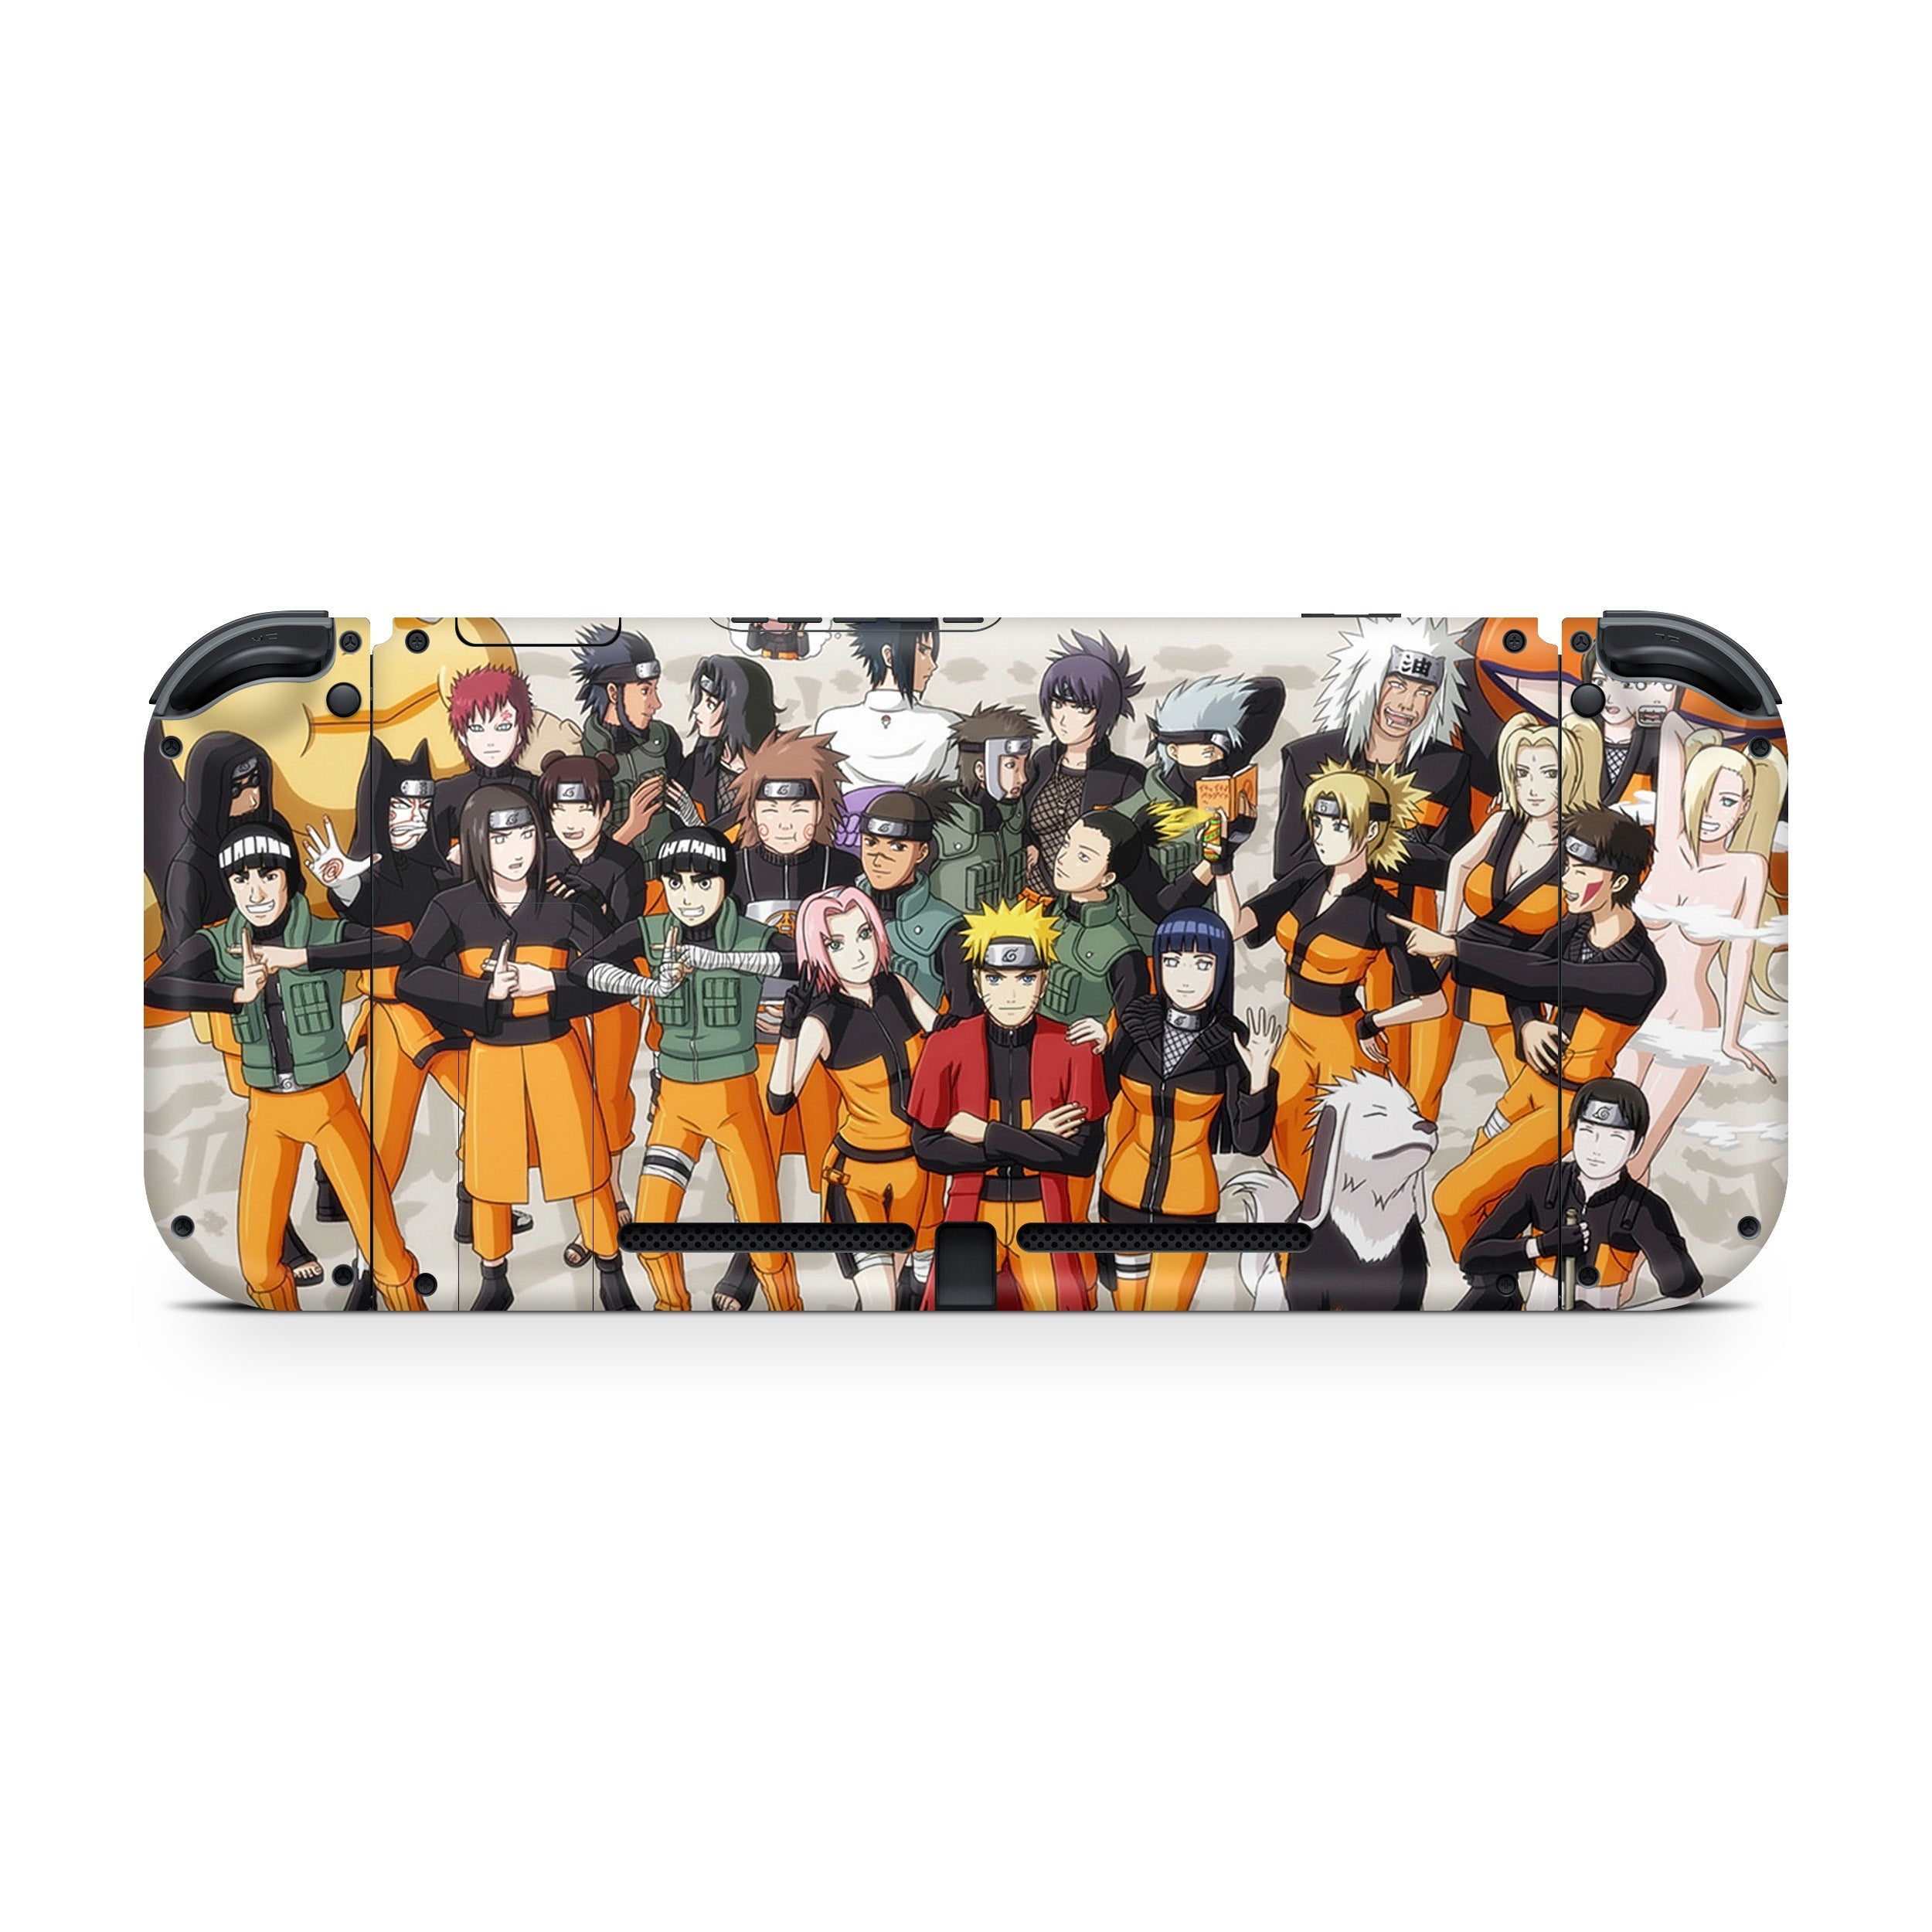 A video game skin featuring a Naruto Squad design for the Nintendo Switch.